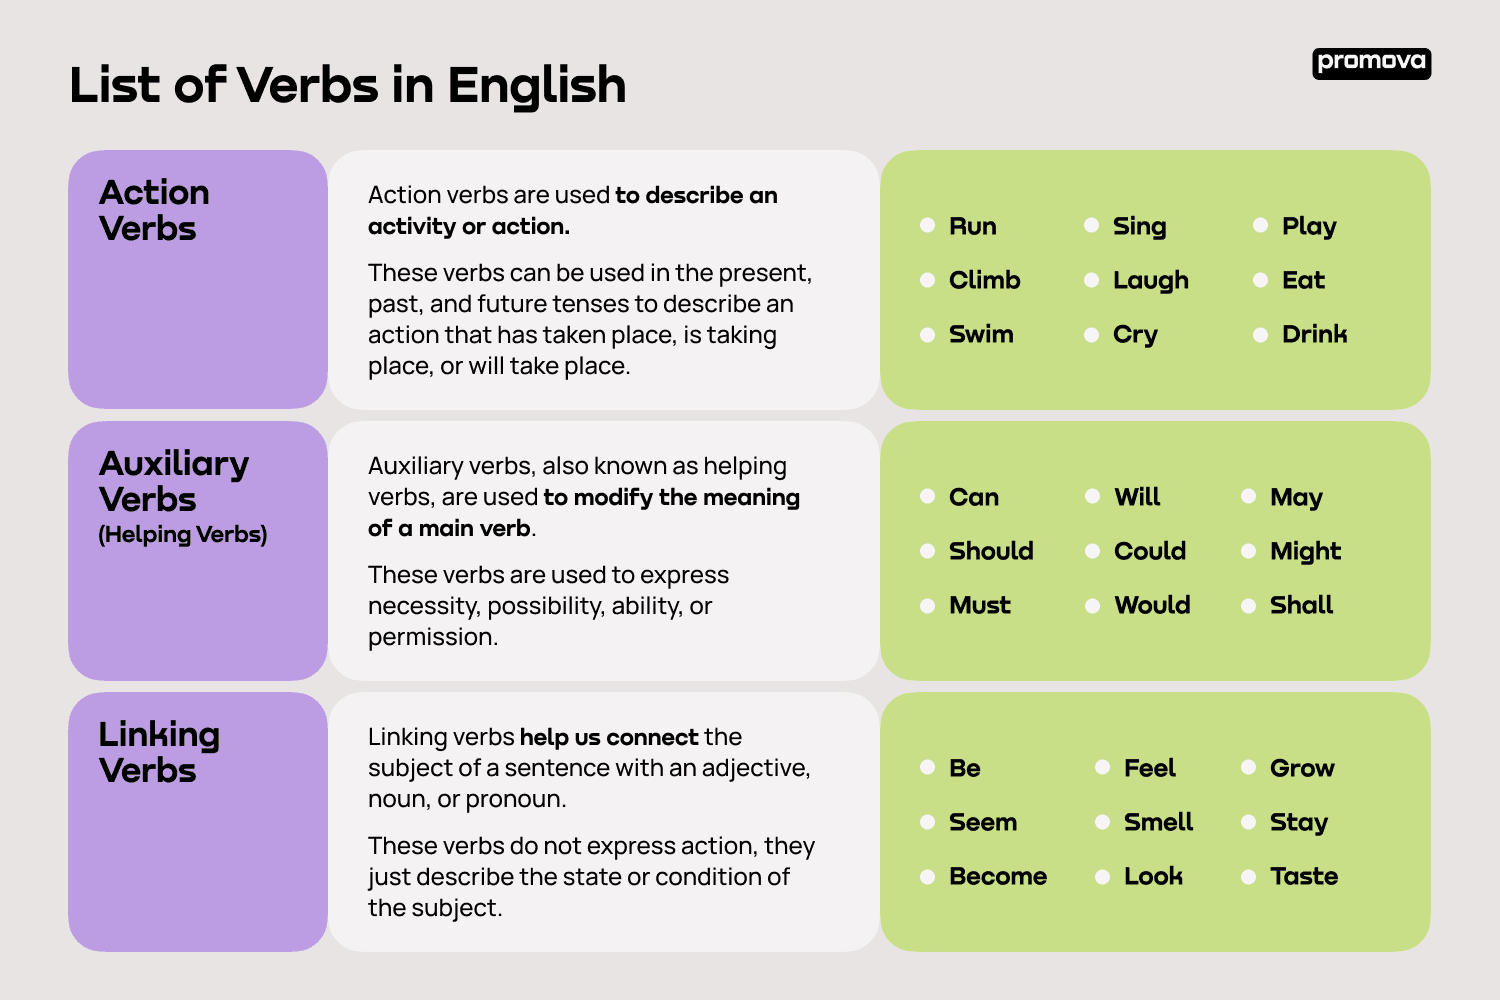 List of Verbs in English